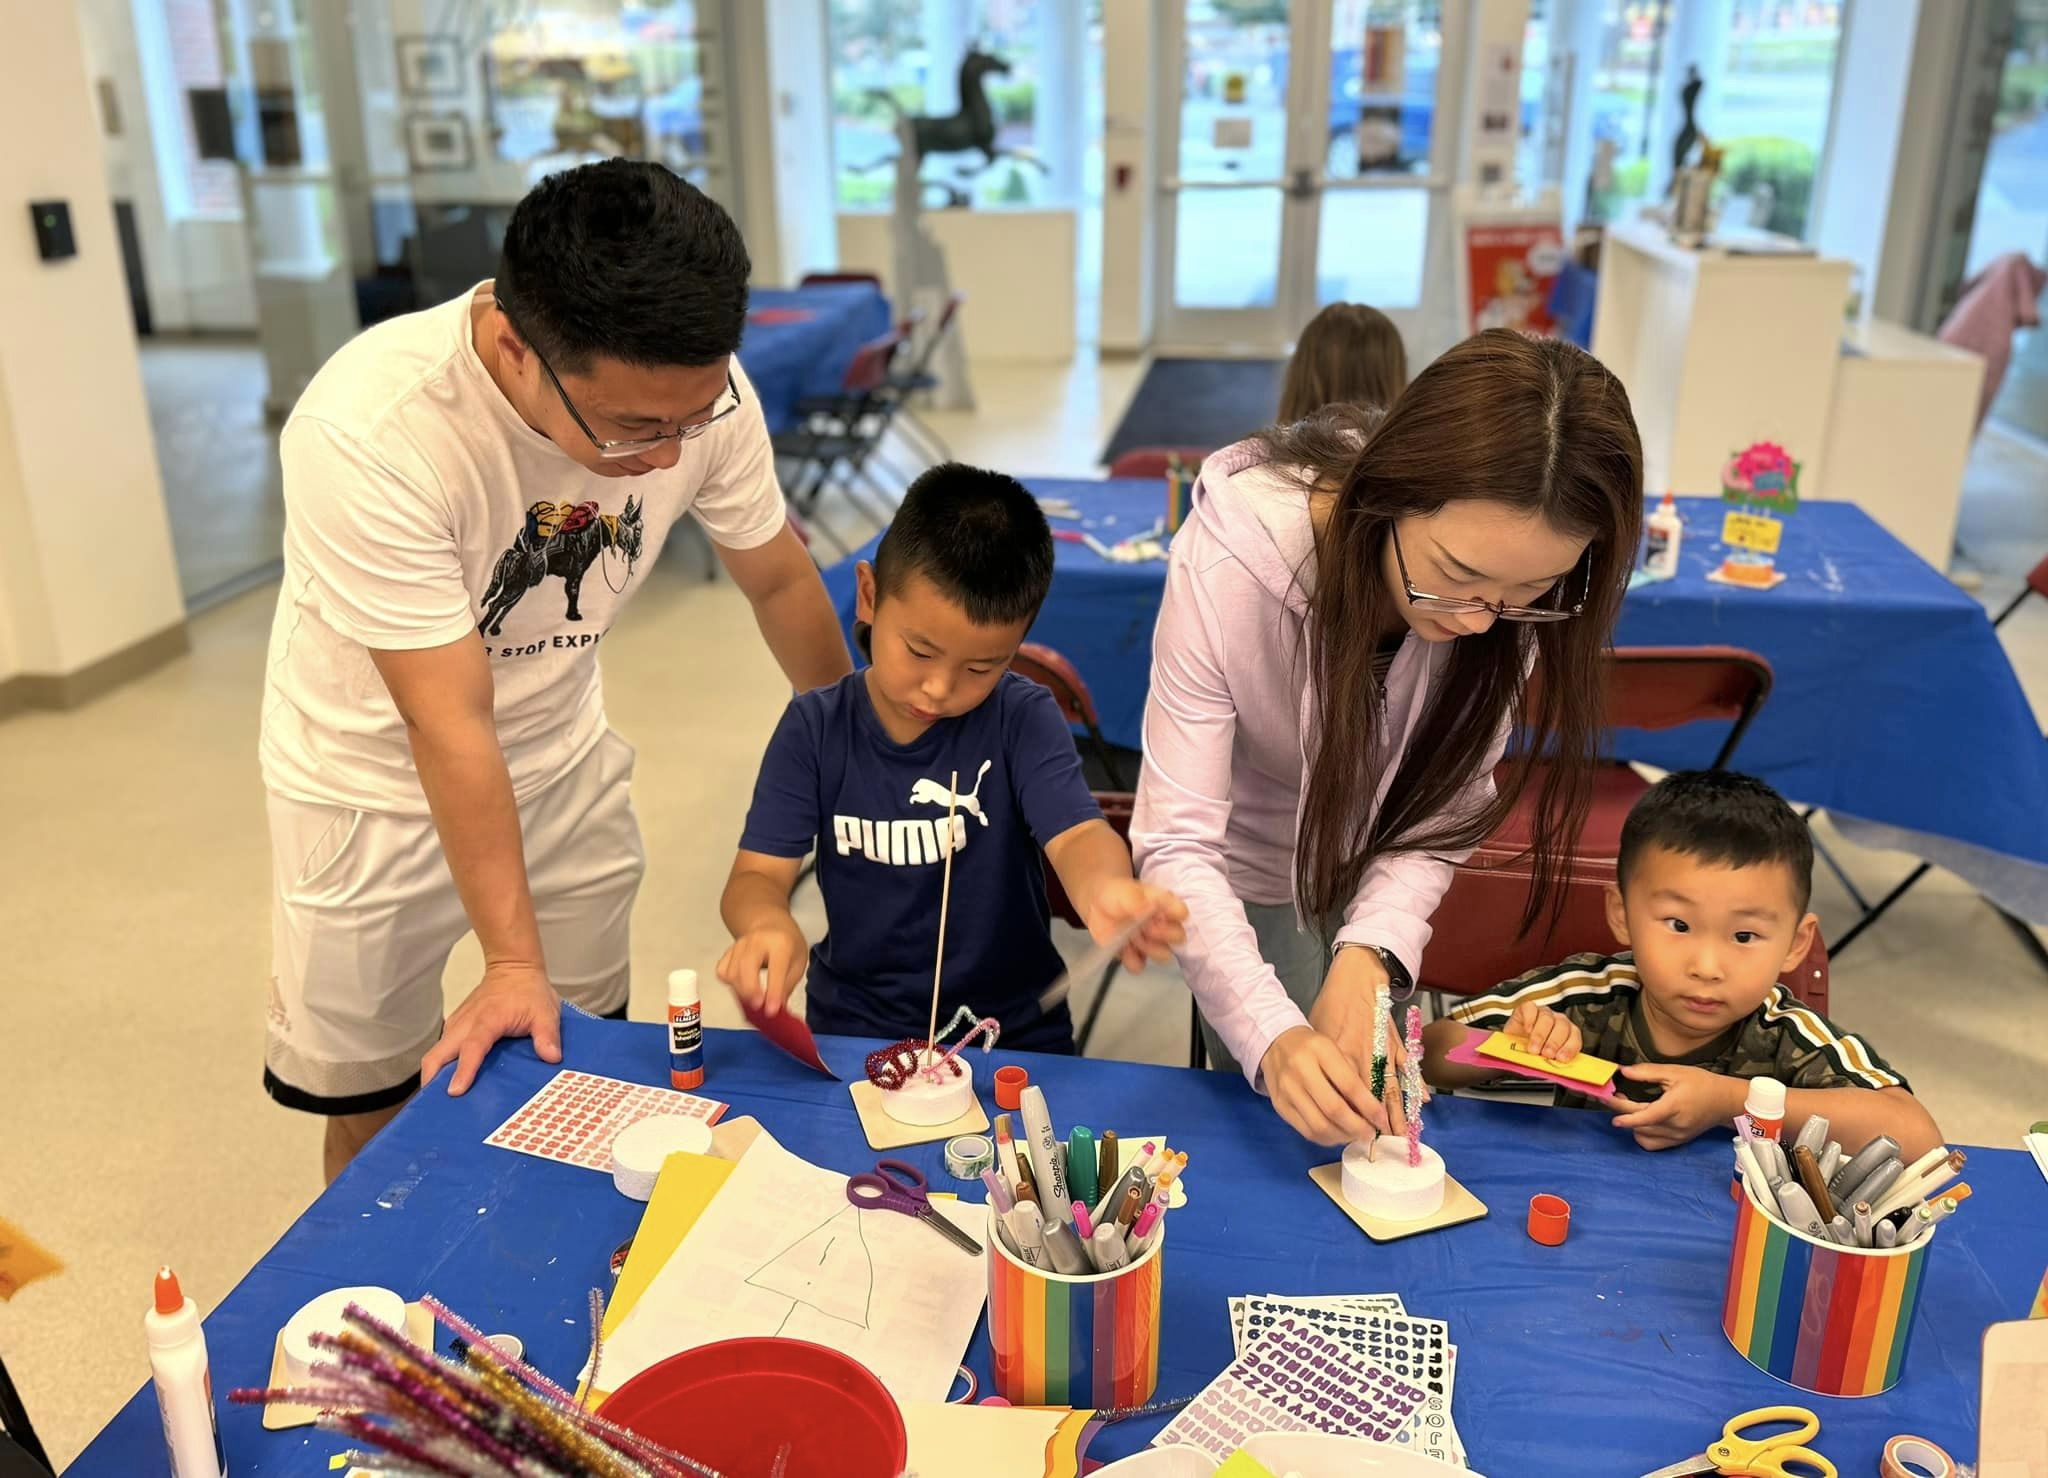 A family working on artSPARK activity together